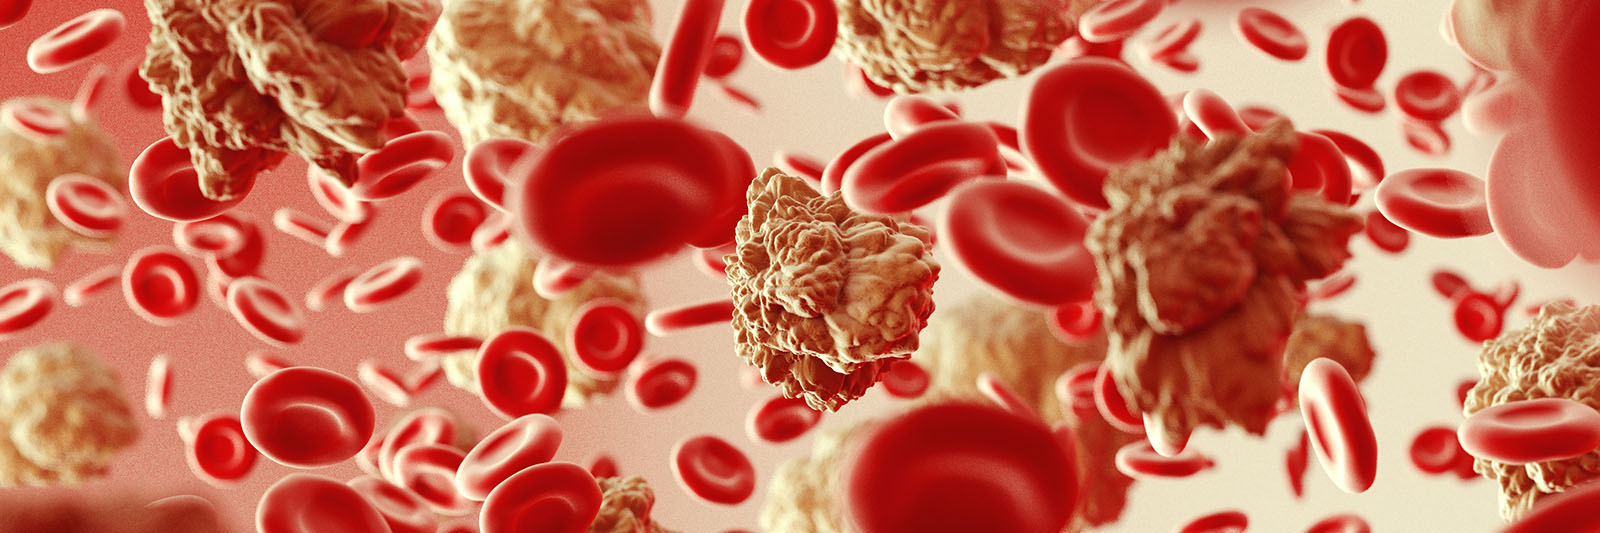 Red and white blood cells